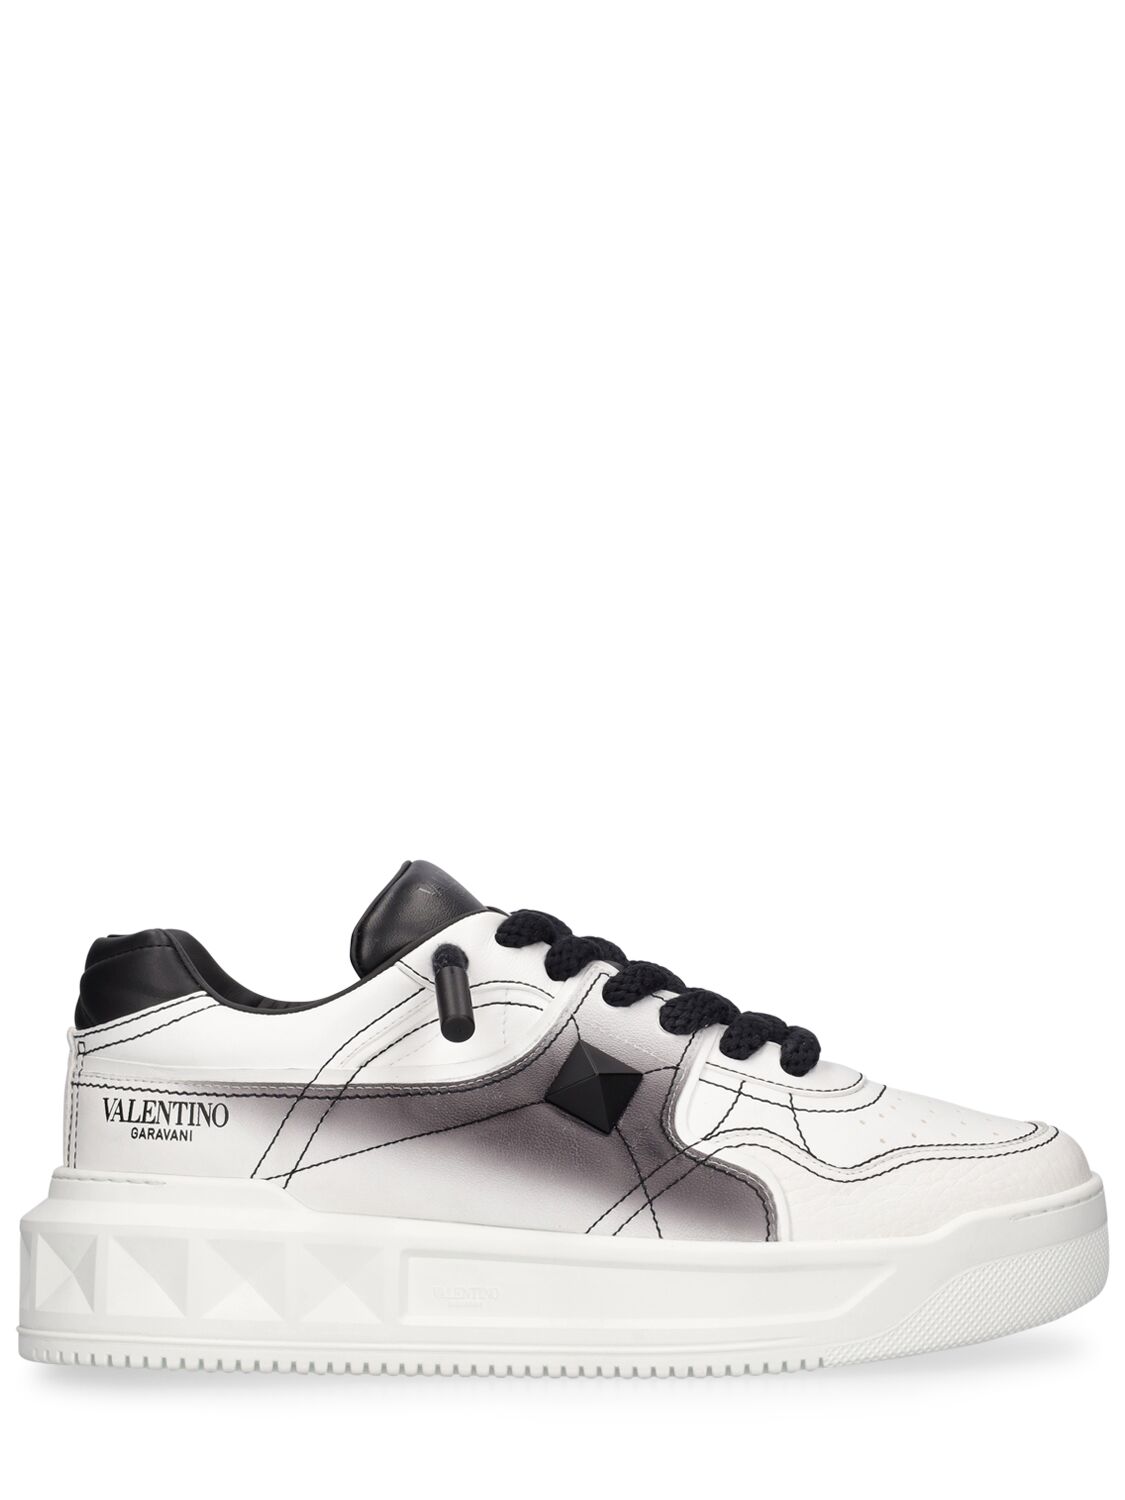 Image of One Stud Degradè Leather Low Top Sneaker